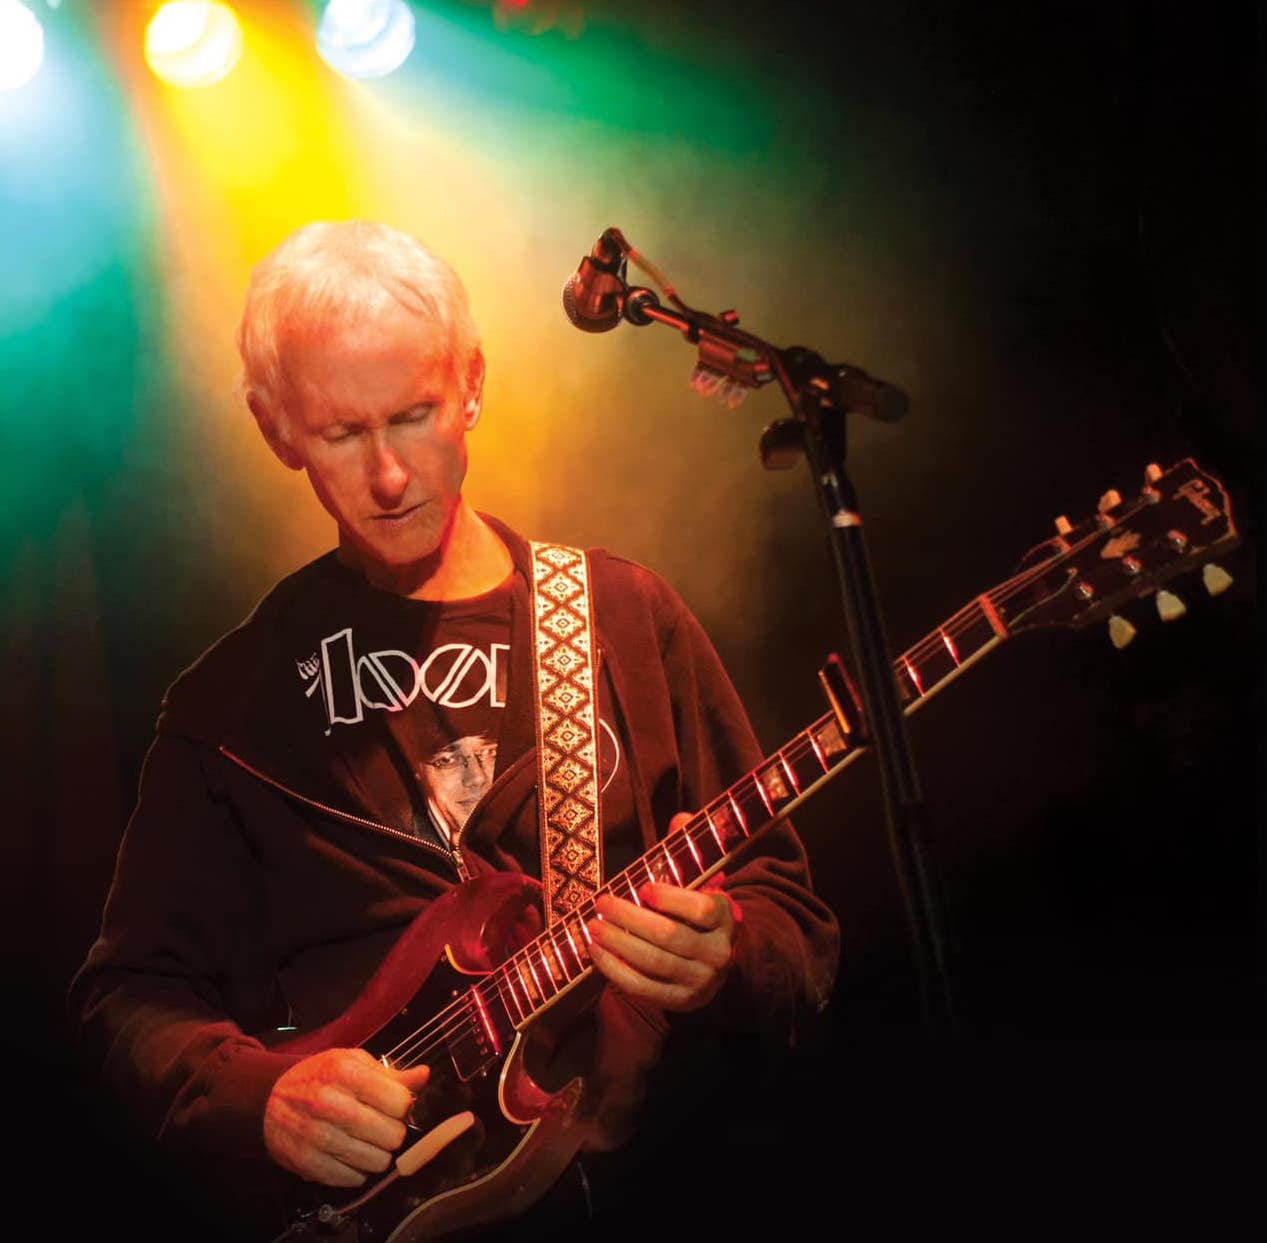 Featured image for “Robby Krieger of the Doors Returns to Jacksonville for a Night of Legendary Music”